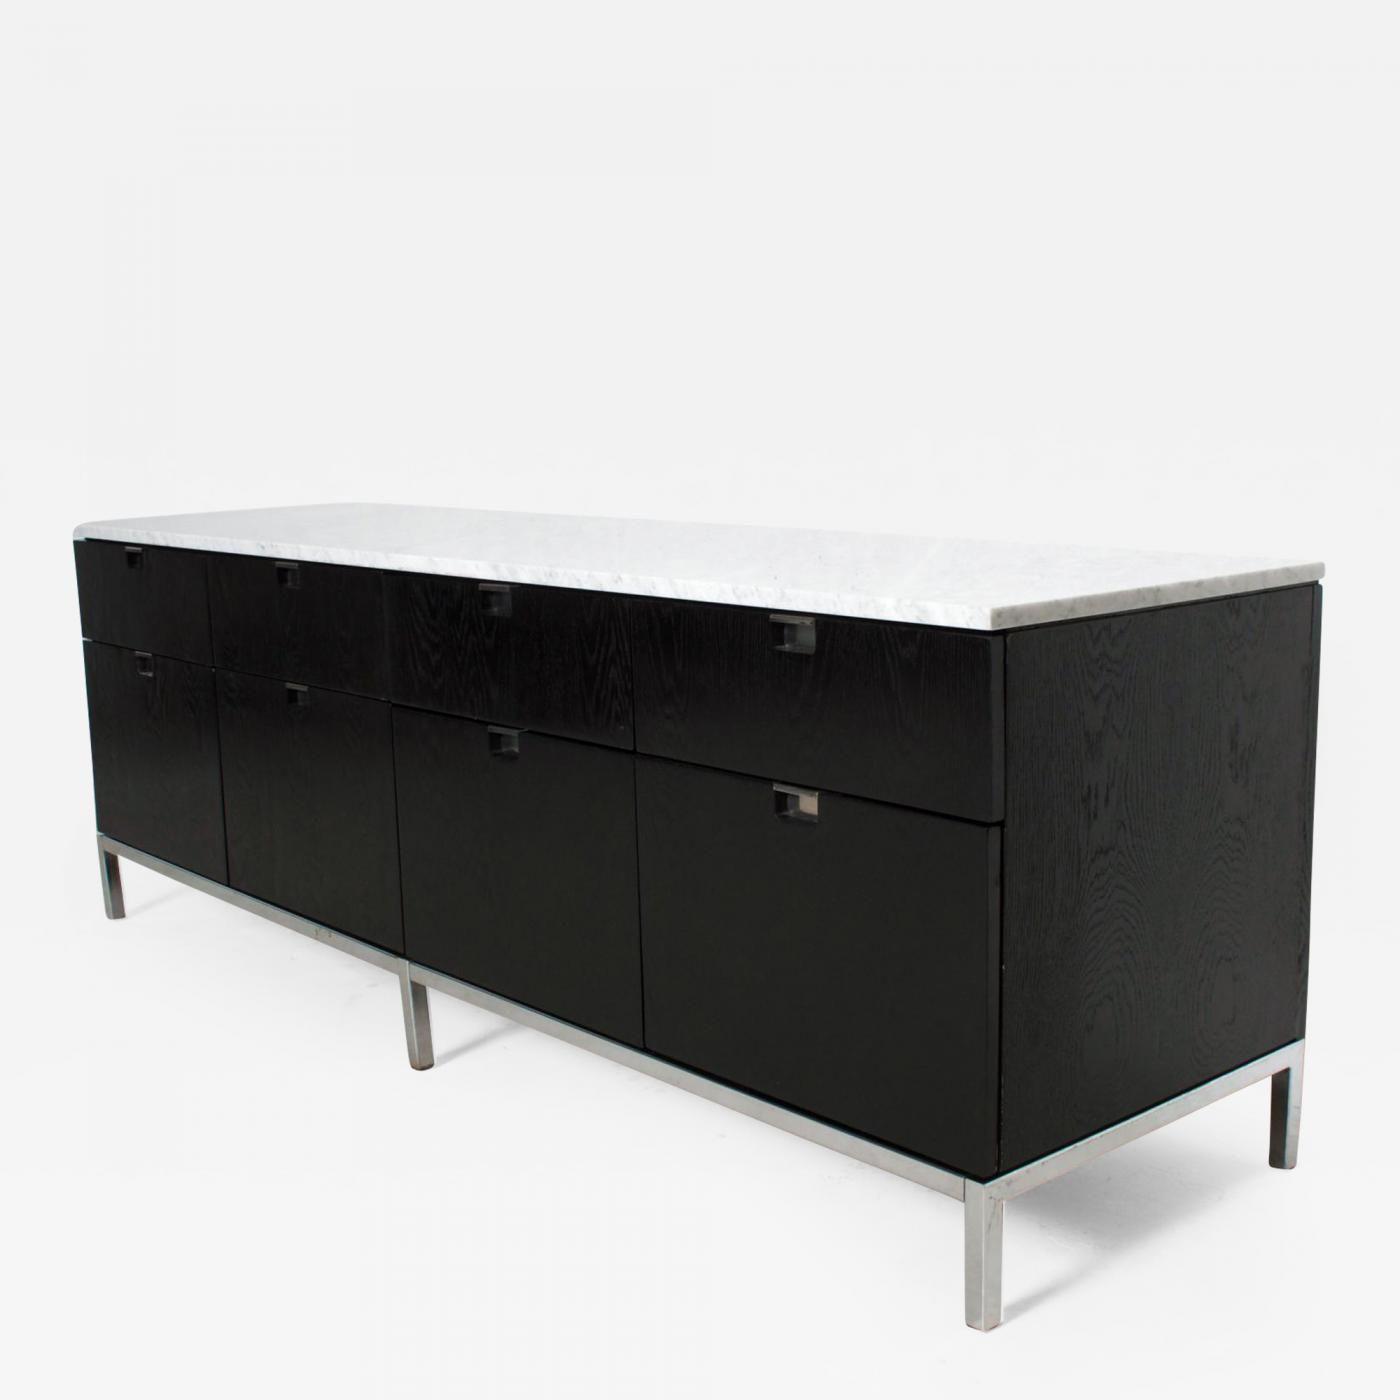 Florence Knoll – Florence Knoll Credenza With White Carrera Marble In Black  Oak With Regard To Copper Leaf Wood Credenzas (View 30 of 30)